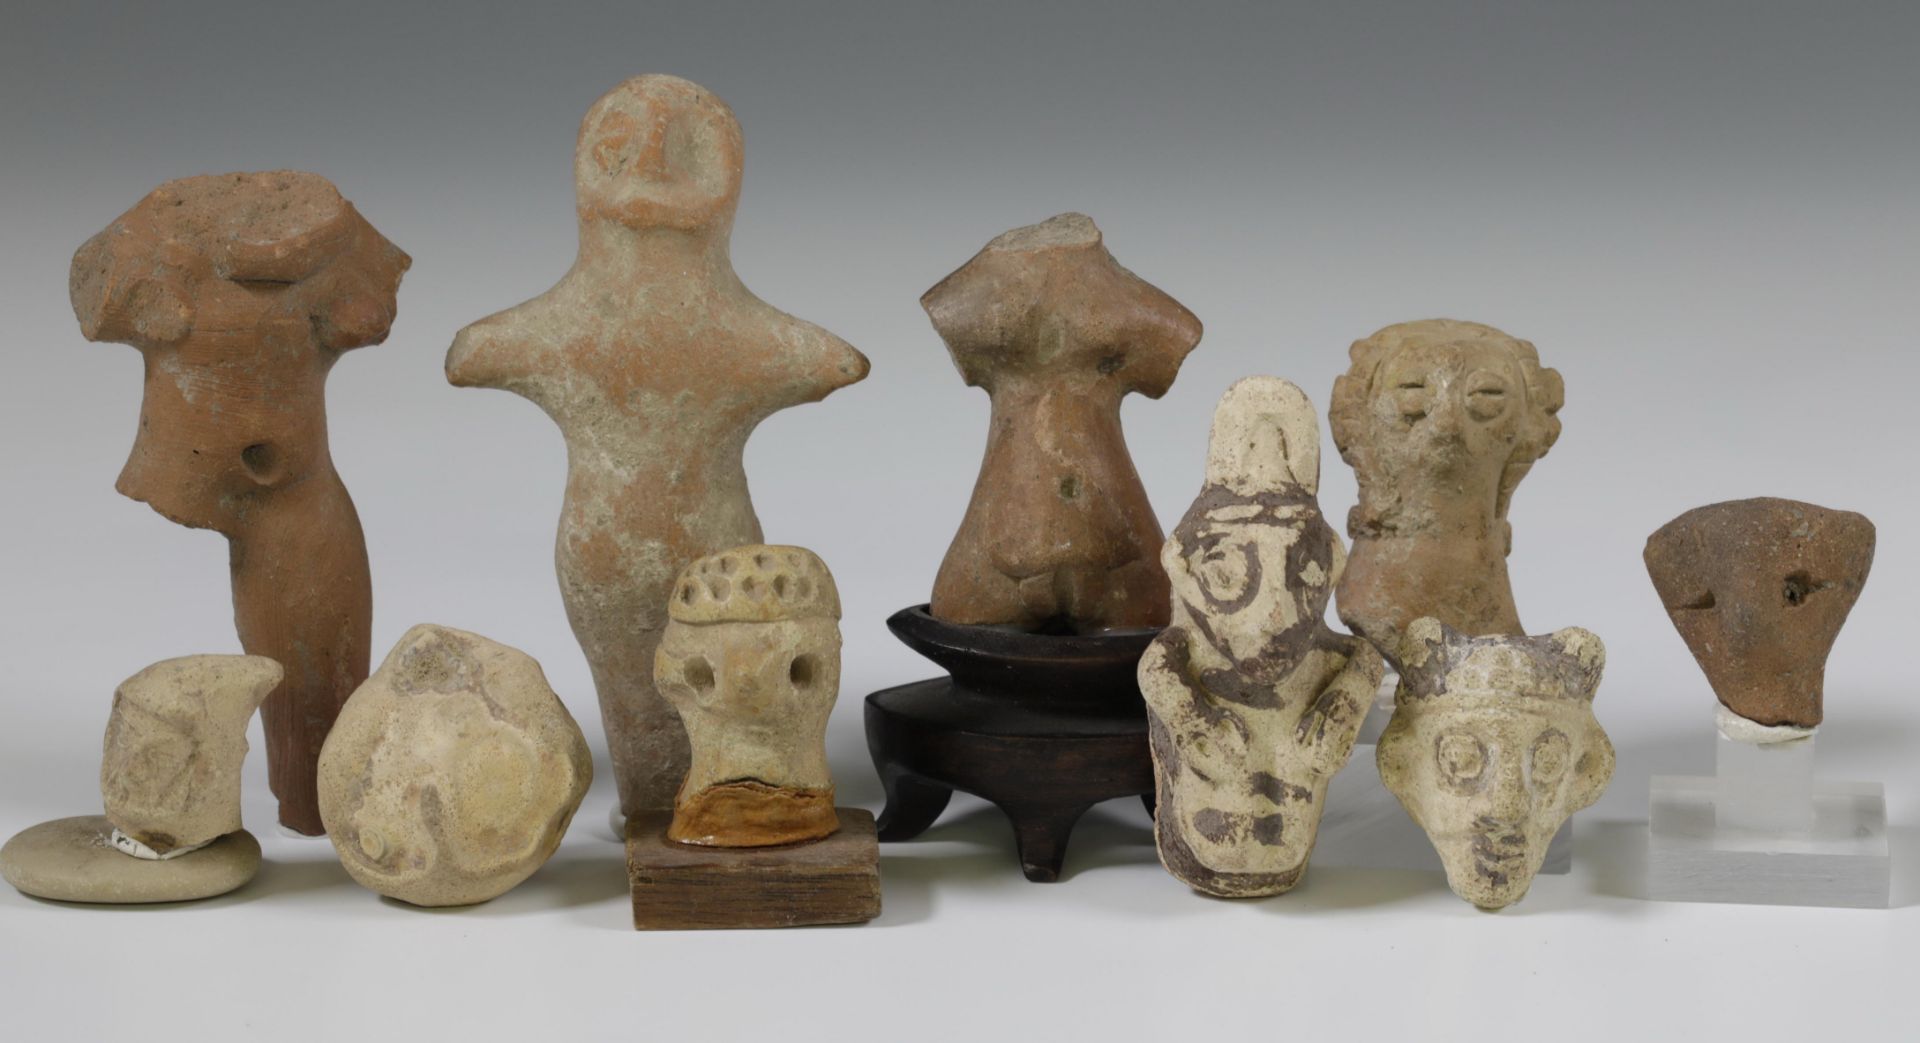 A collection of ten terracotta Near Eastern objects, ca. 1000-500 BC.